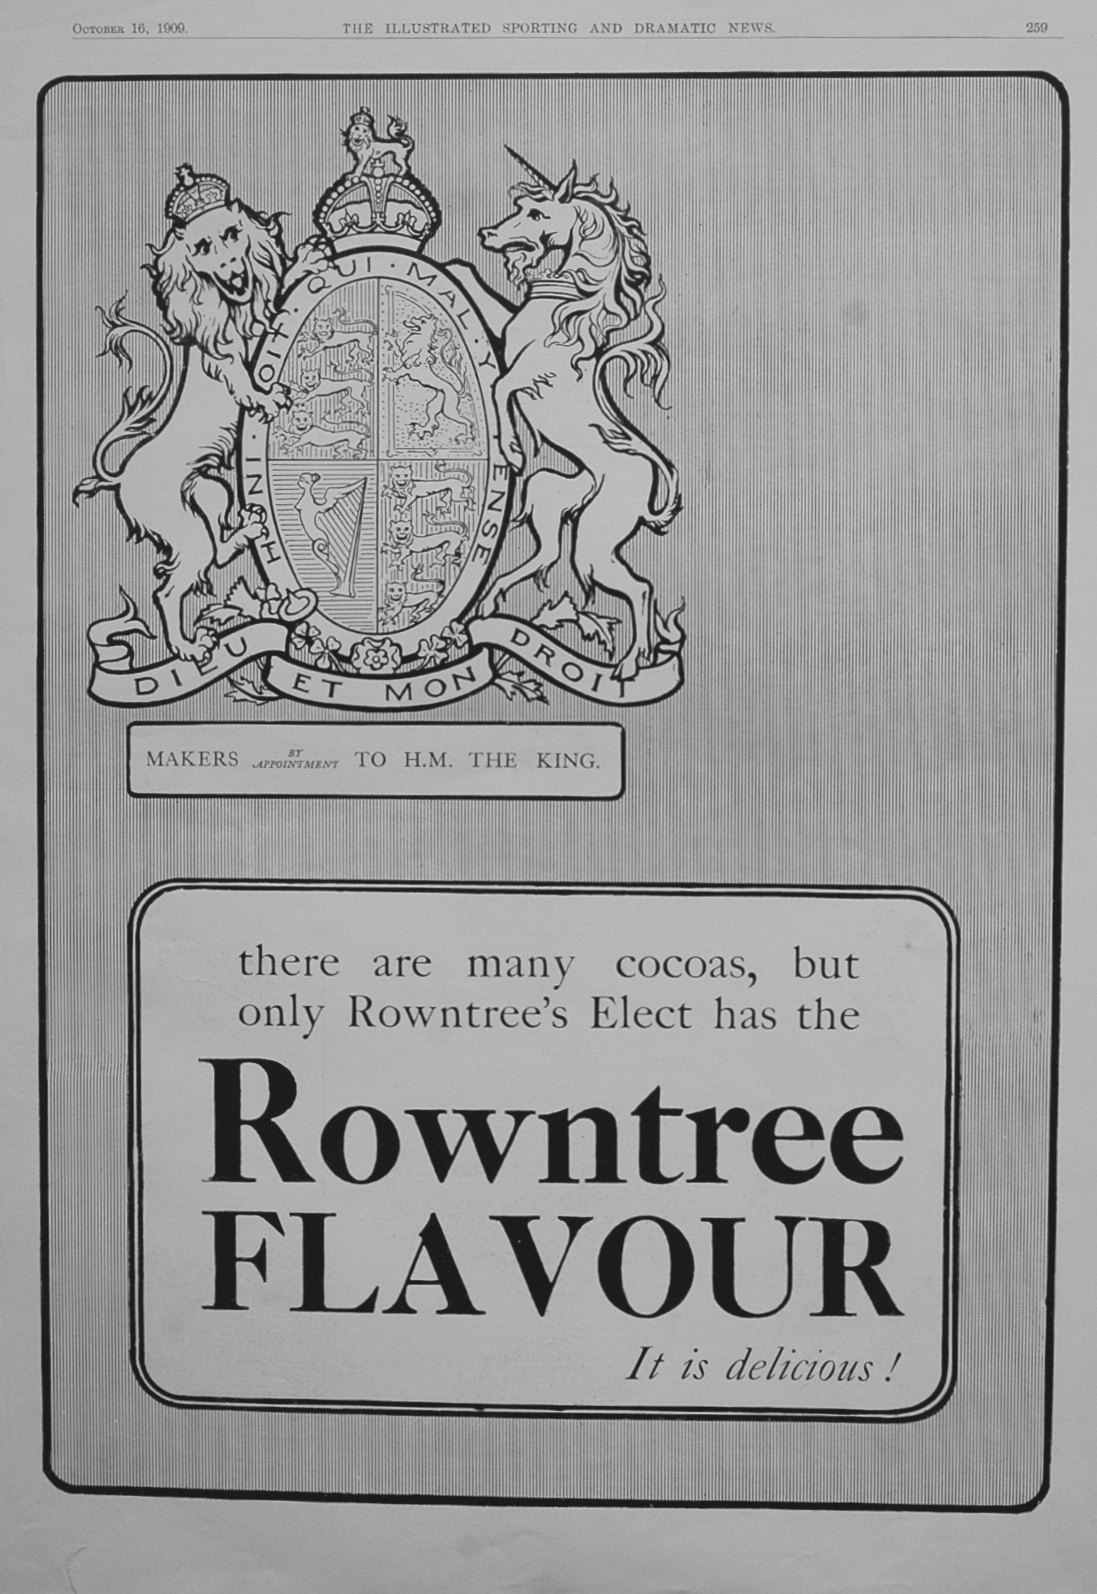 Advert for 